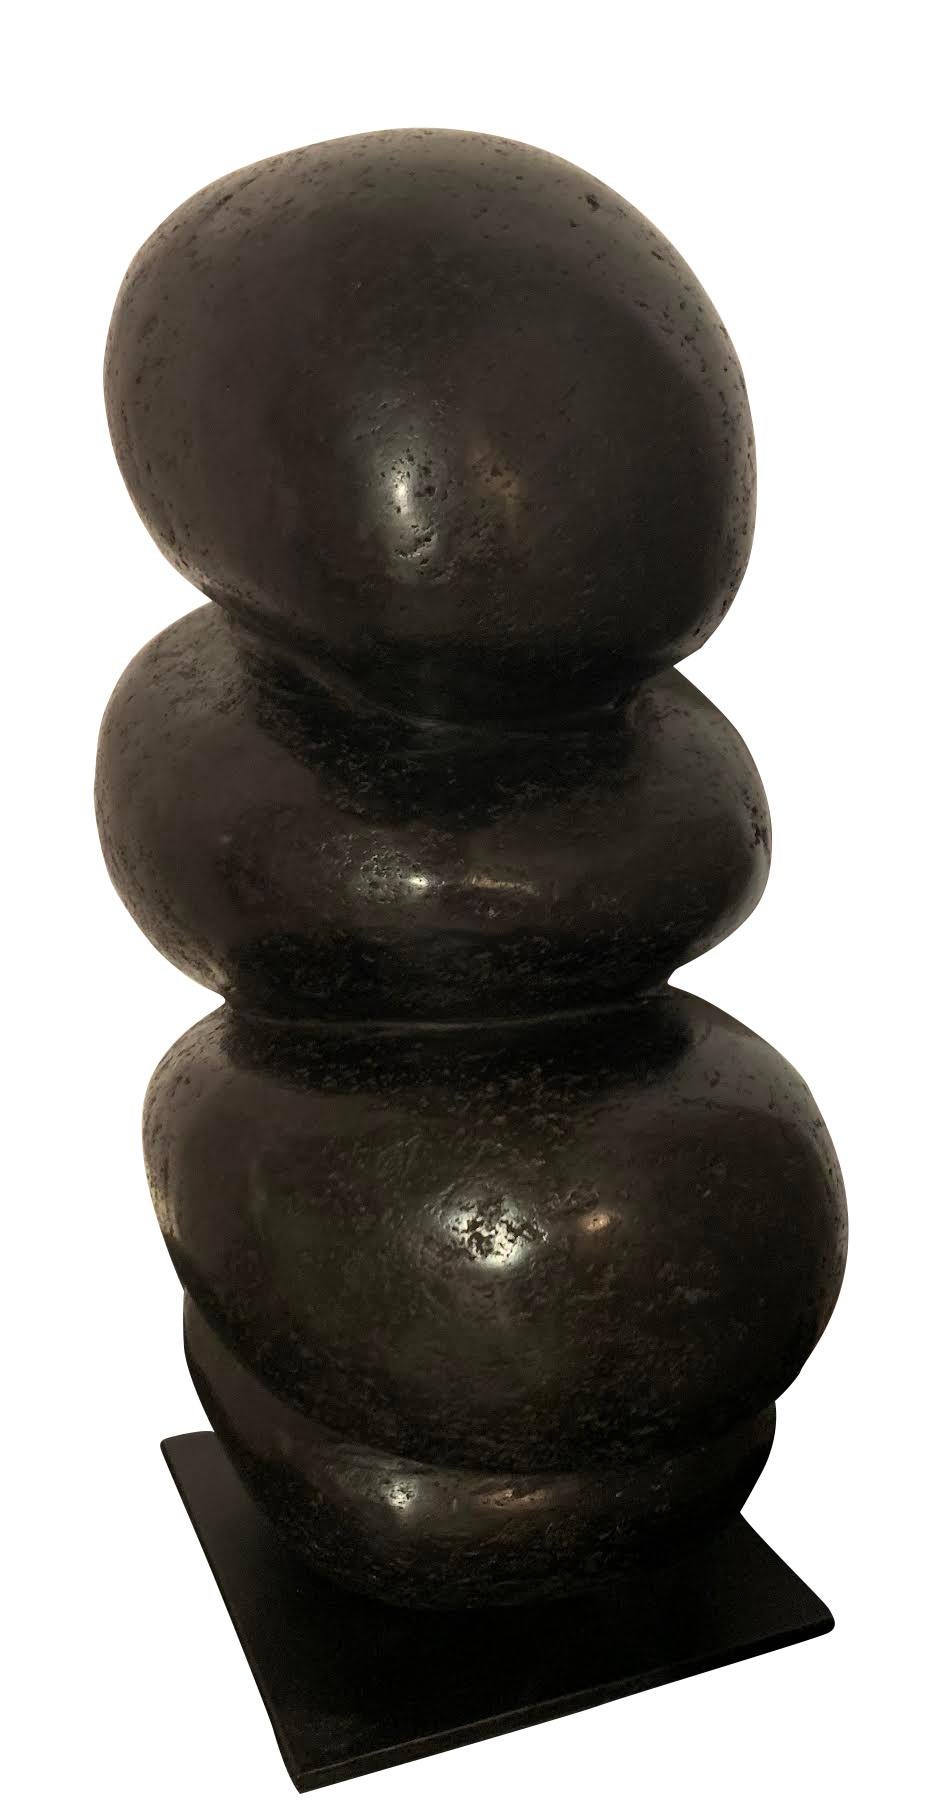 Contemporary Indonesian rock sculpture from river stone.
Four smooth and polished finish stones joined to form decorative sculpture.
Mounted on iron stand measures 7